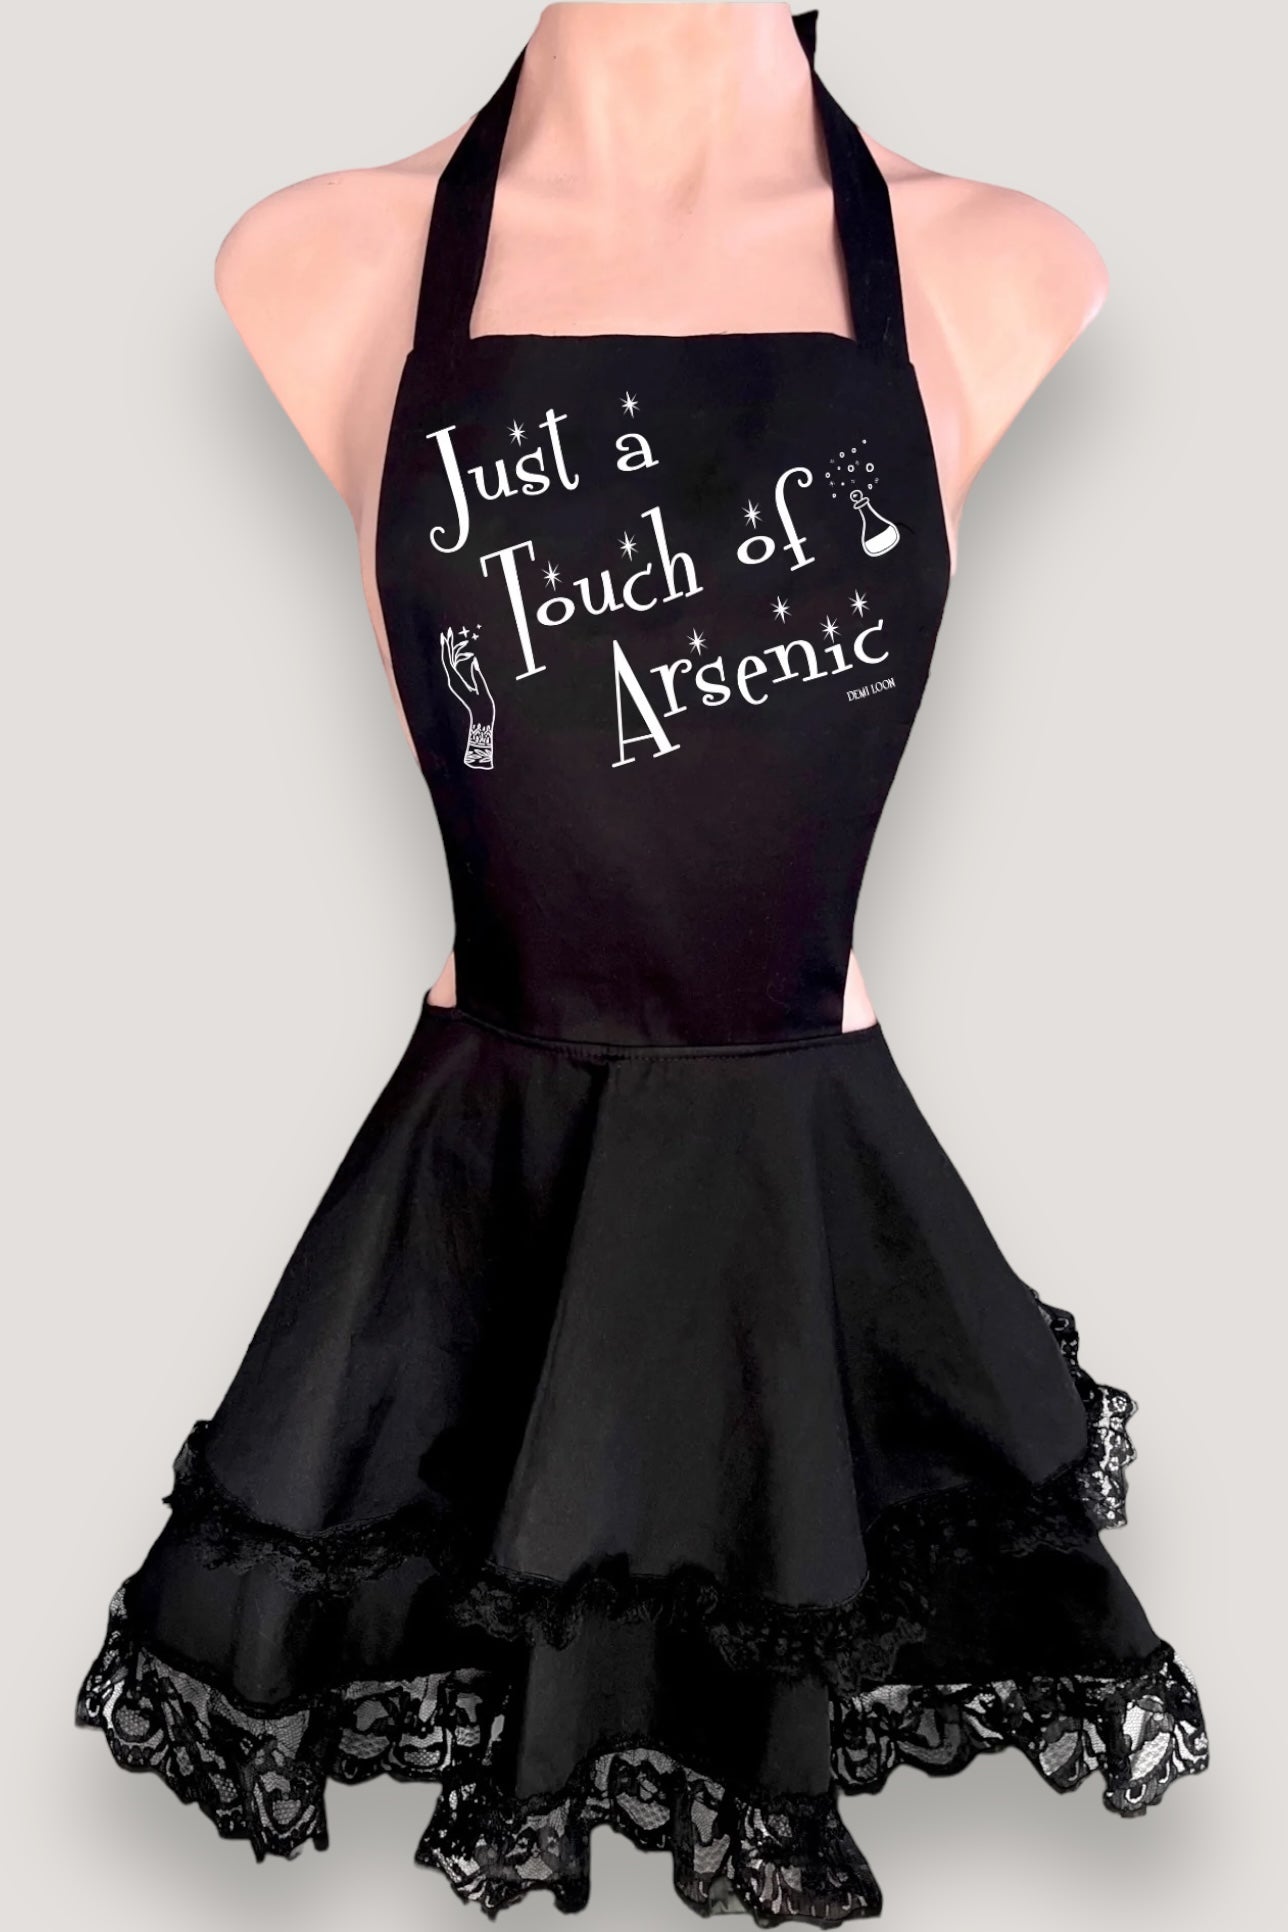 Just A Touch of Arsenic Retro Apron